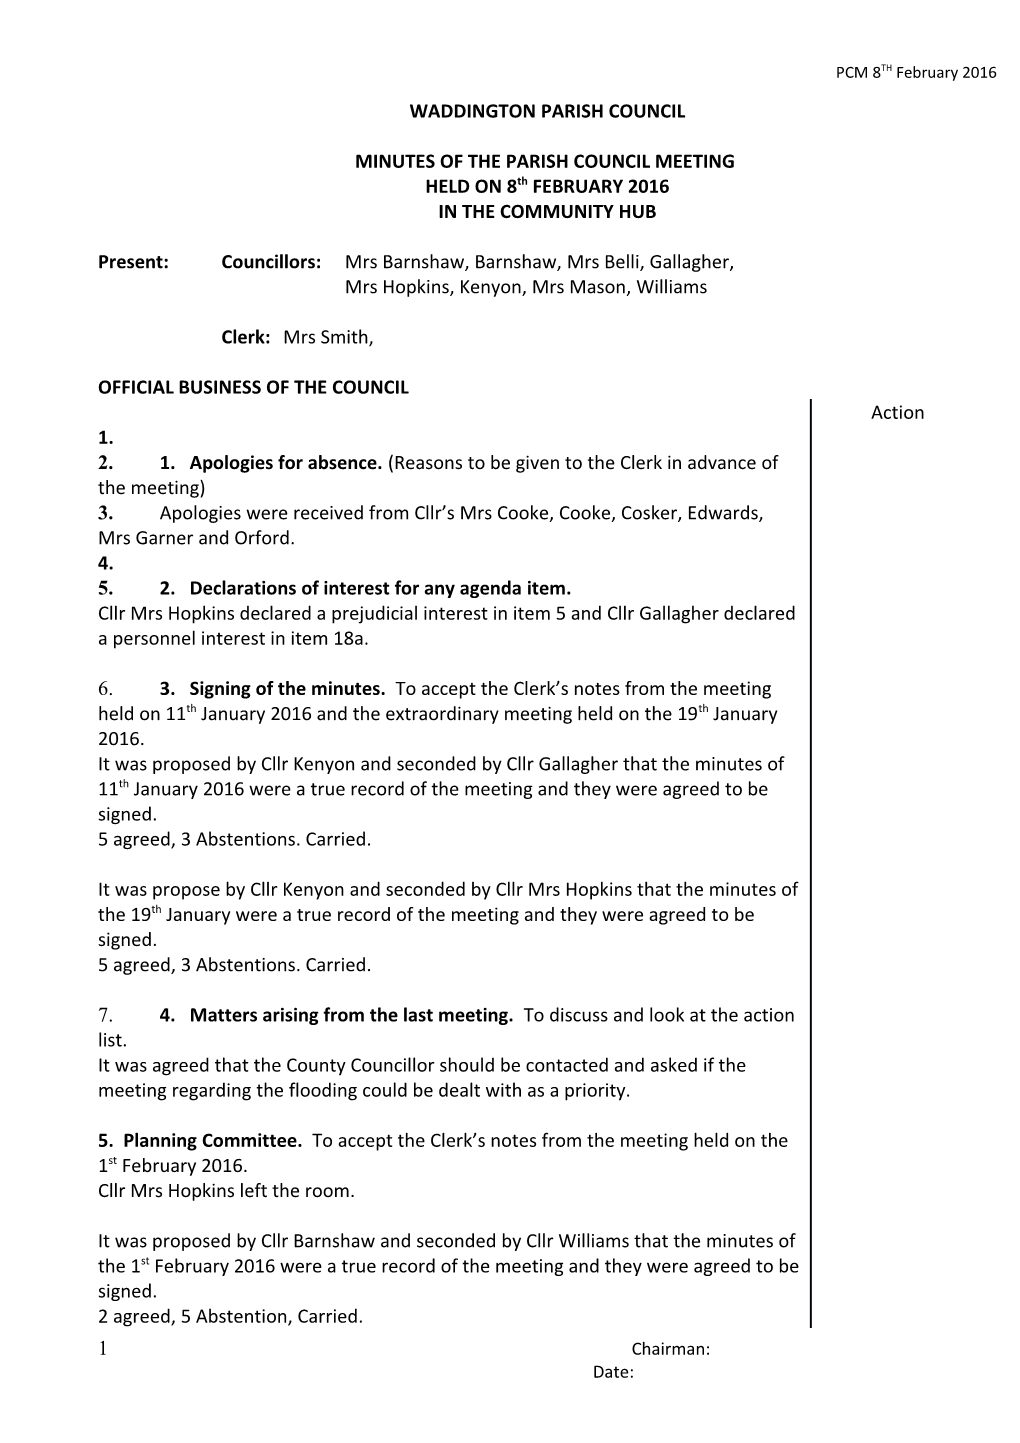 Minutes of the Parish Council Meeting s7